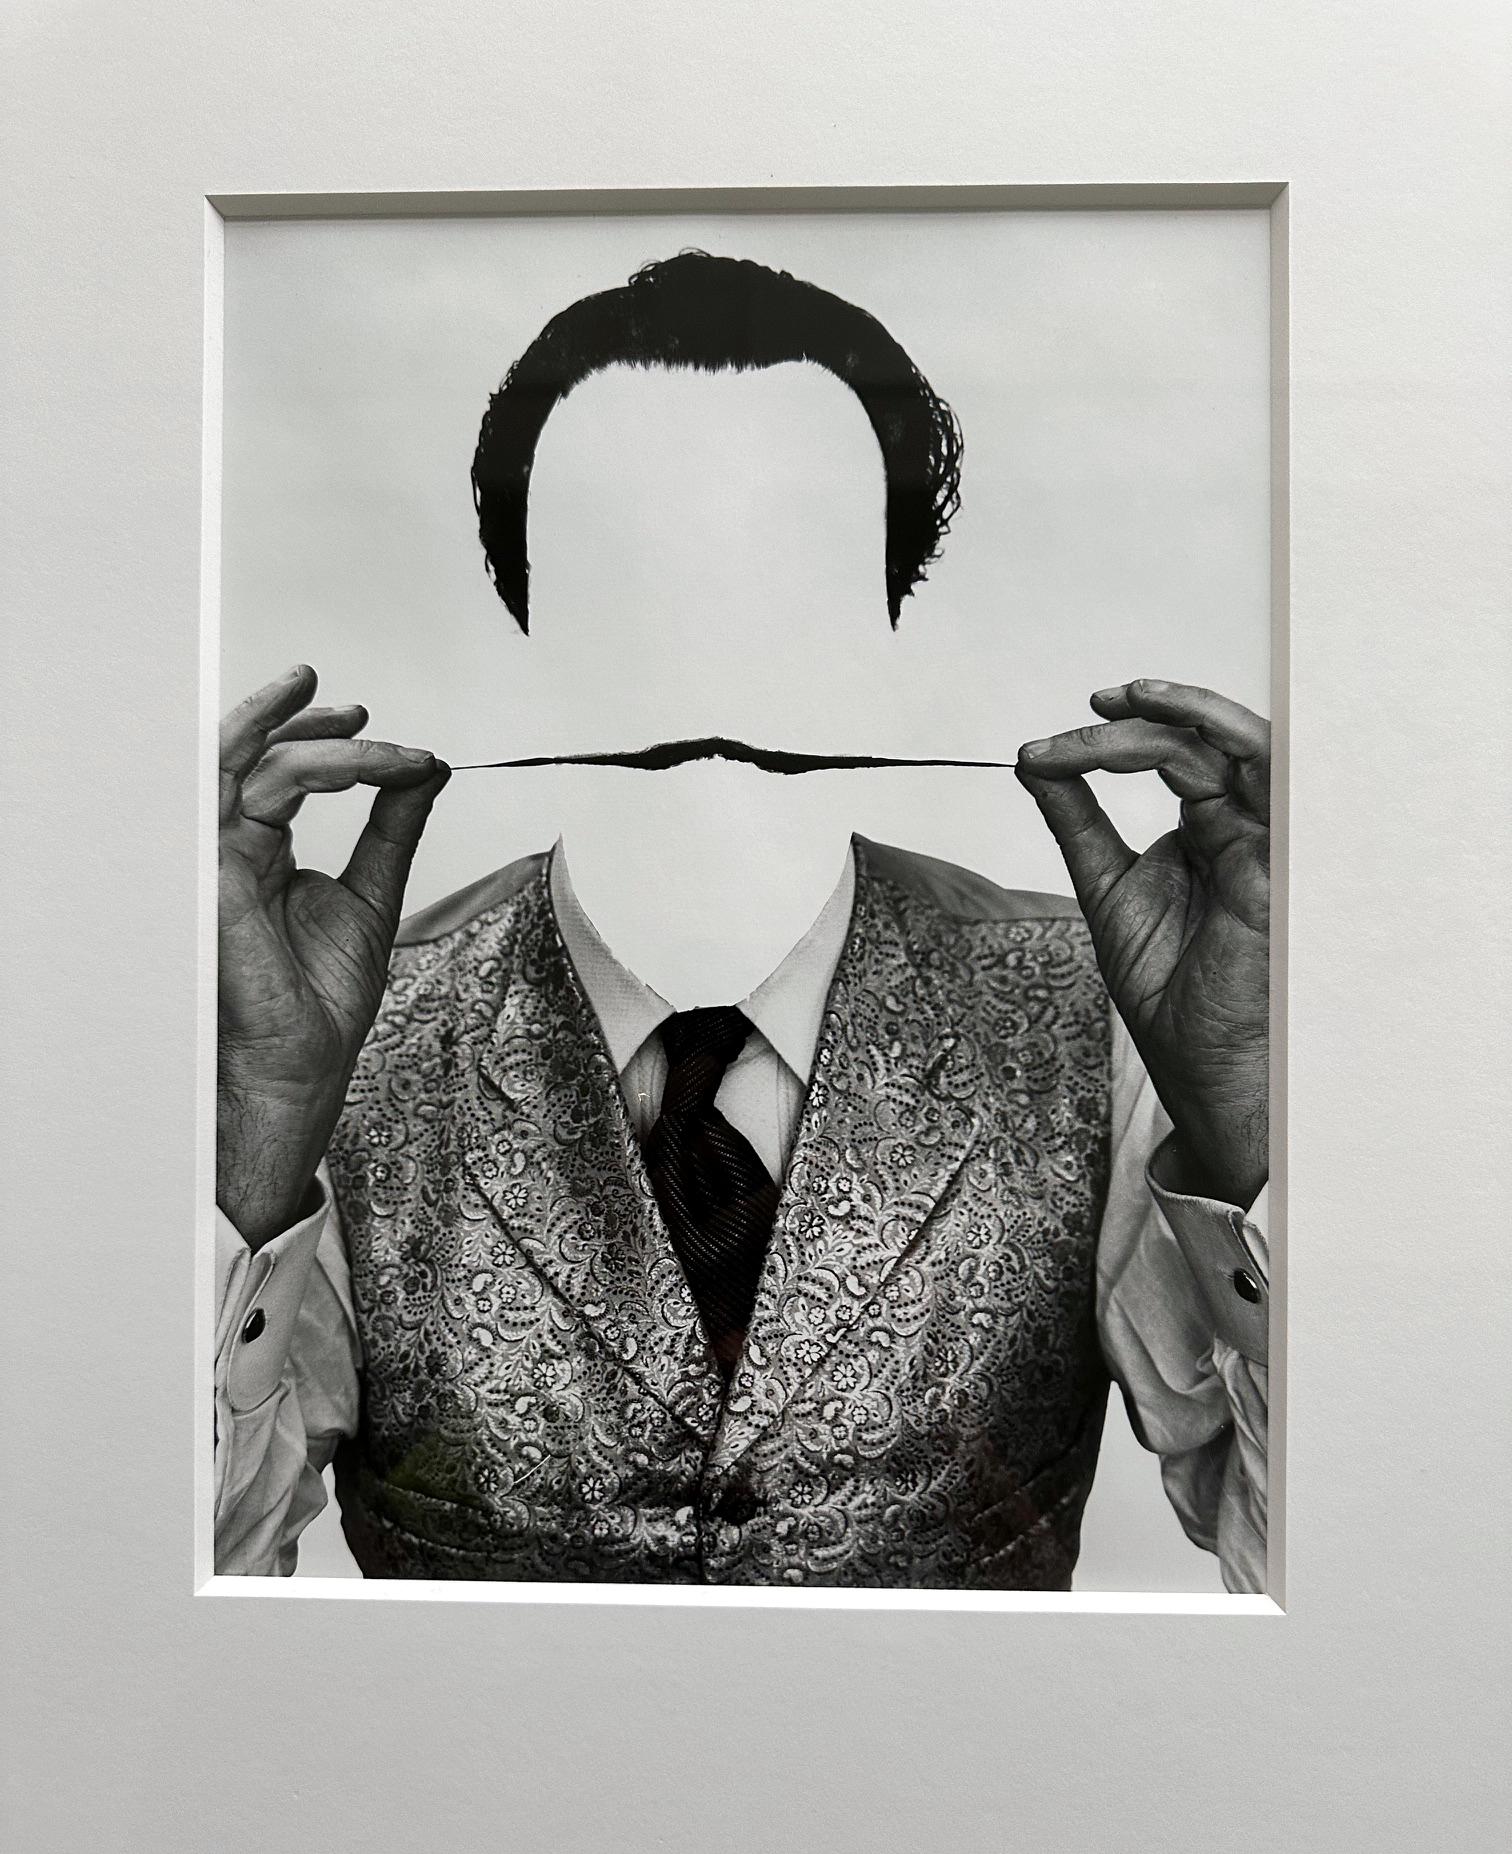 Modern Framed Edition Dali Photograph by Philippe Halsman For Sale